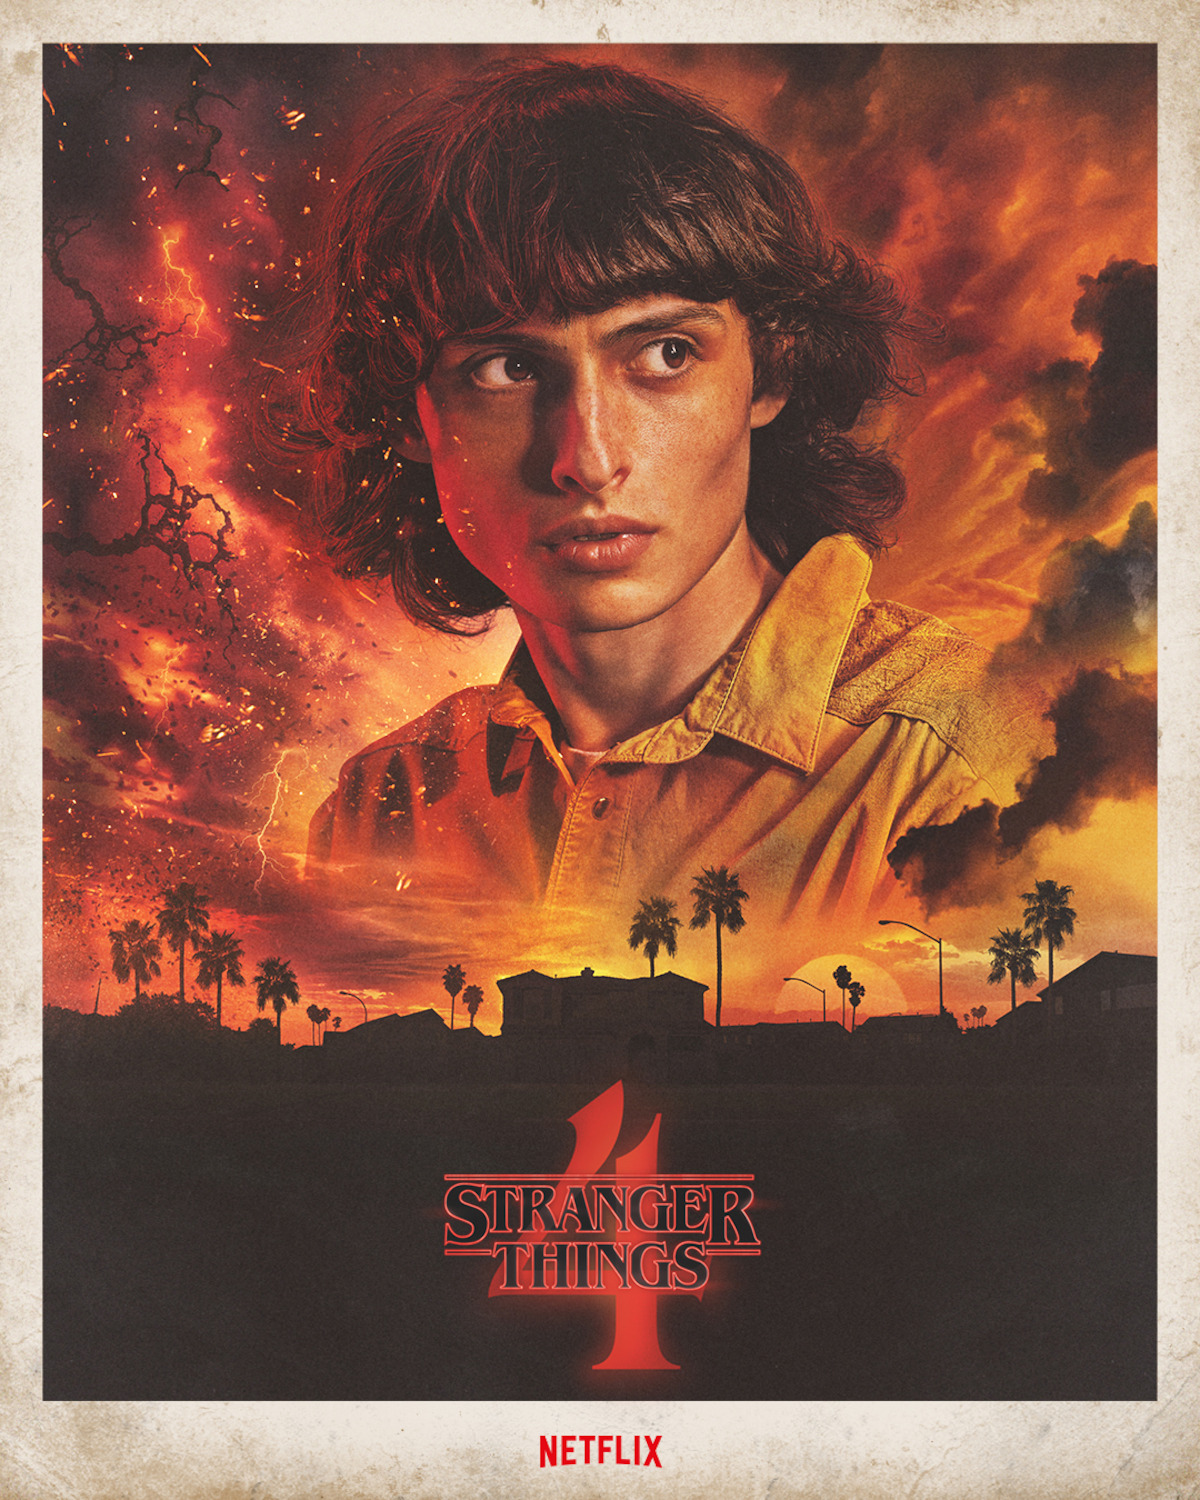 Mike - The Byers Family Finds Trouble in California in New ‘Stranger Things 4’ Posters